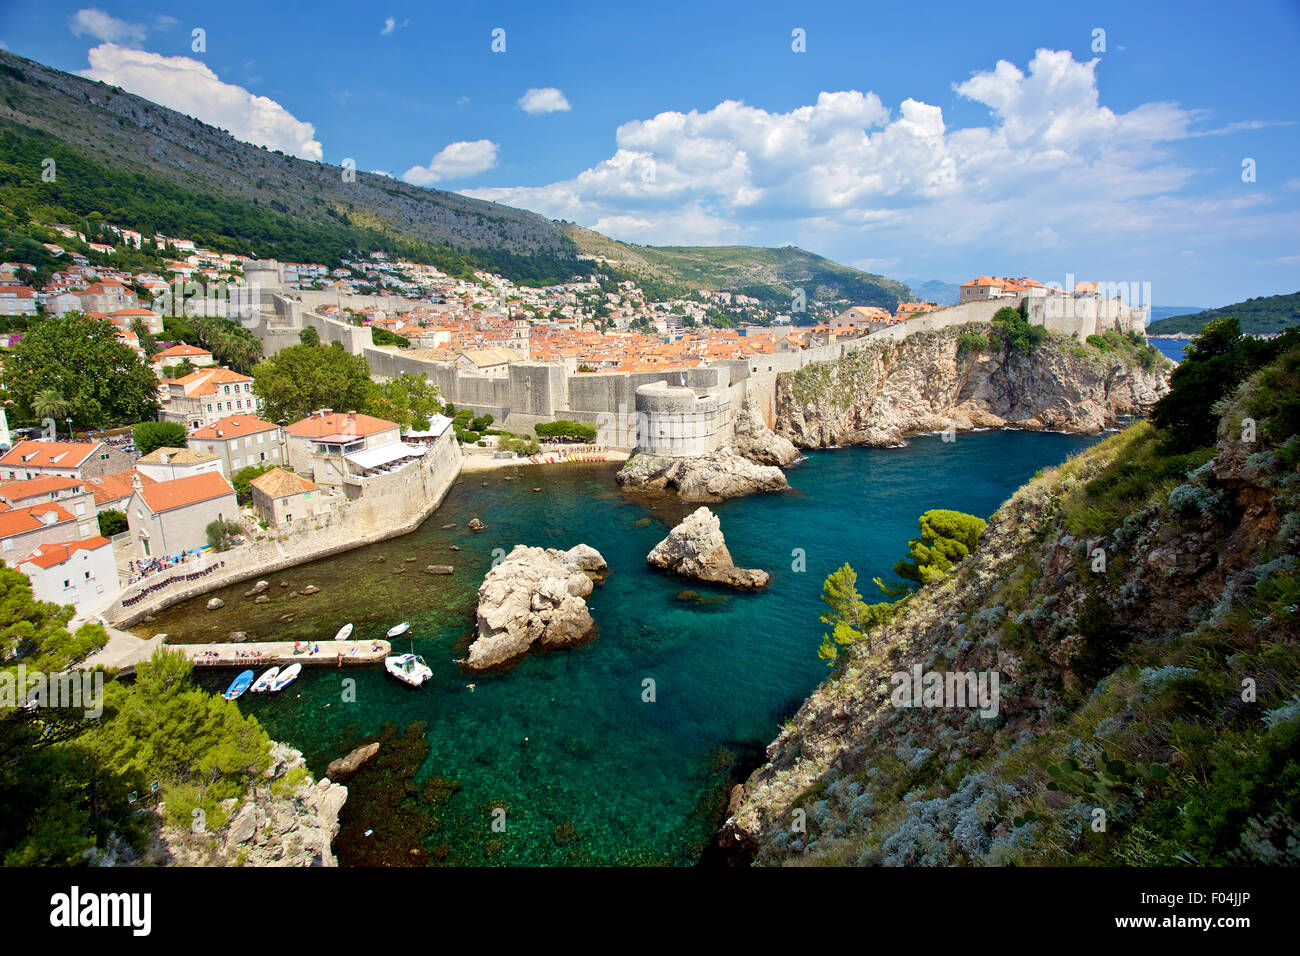 Wide angle view of old city walls in Dubrovnik, Croatia Stock Photo